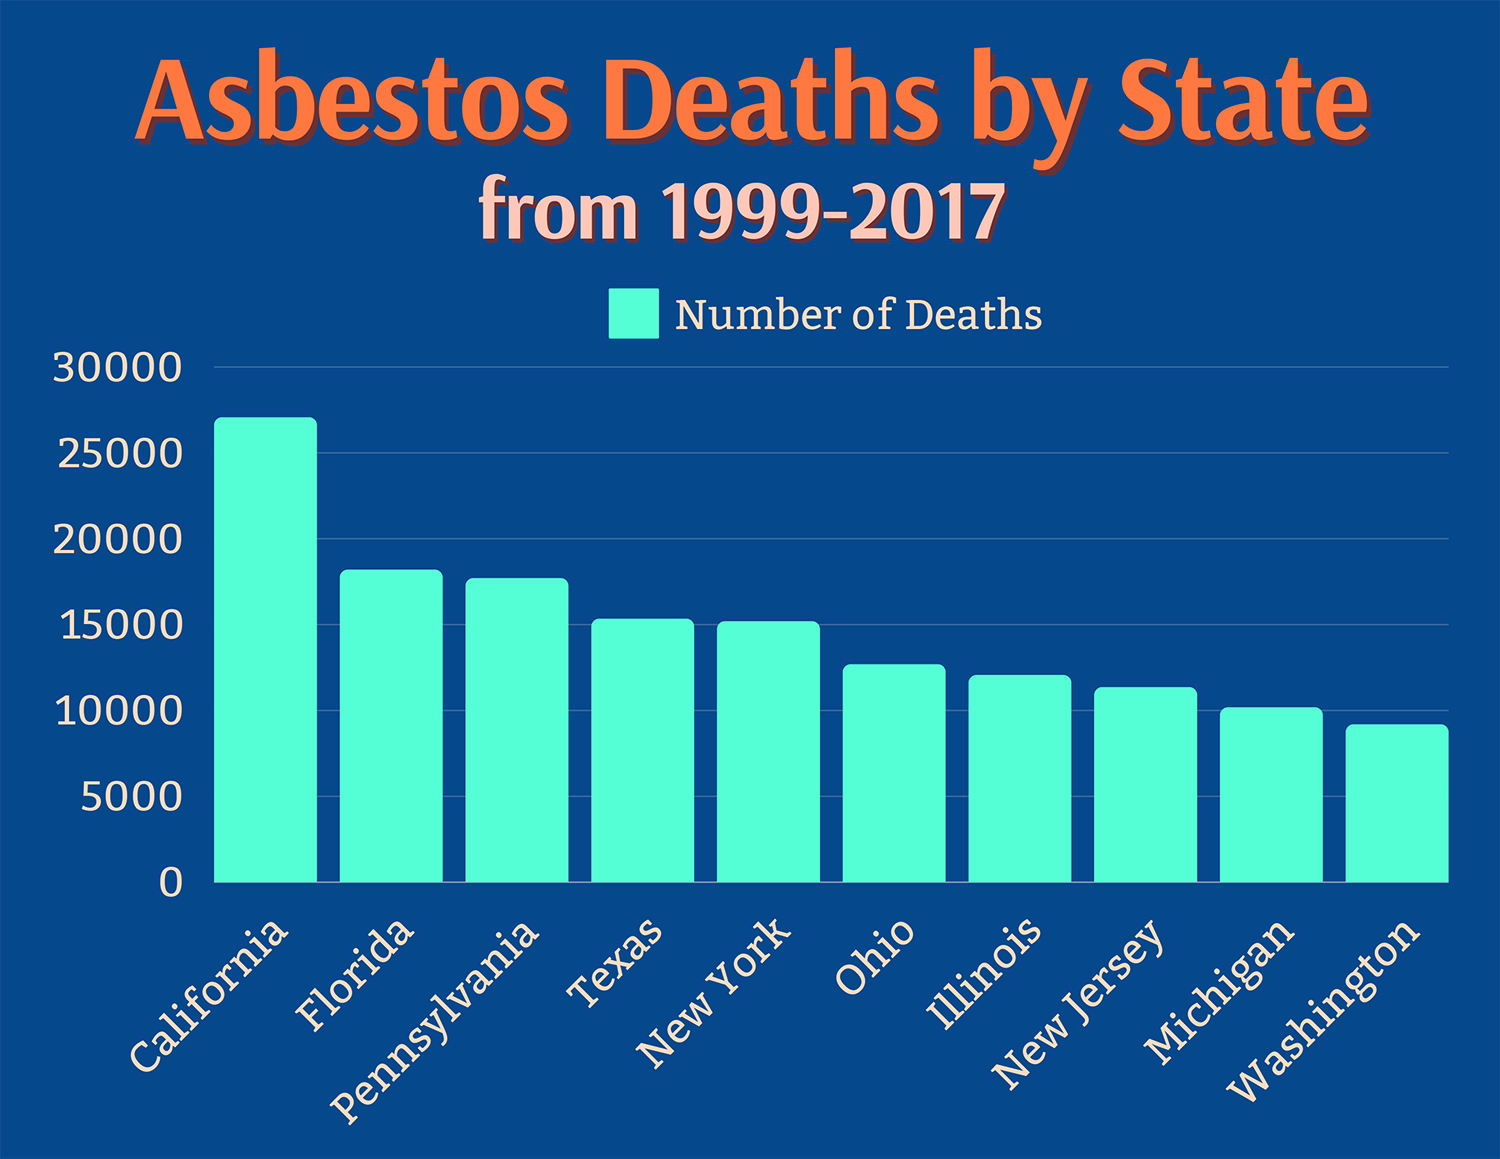 This chart notes the deaths by states due to asbestos from 1999-2017.